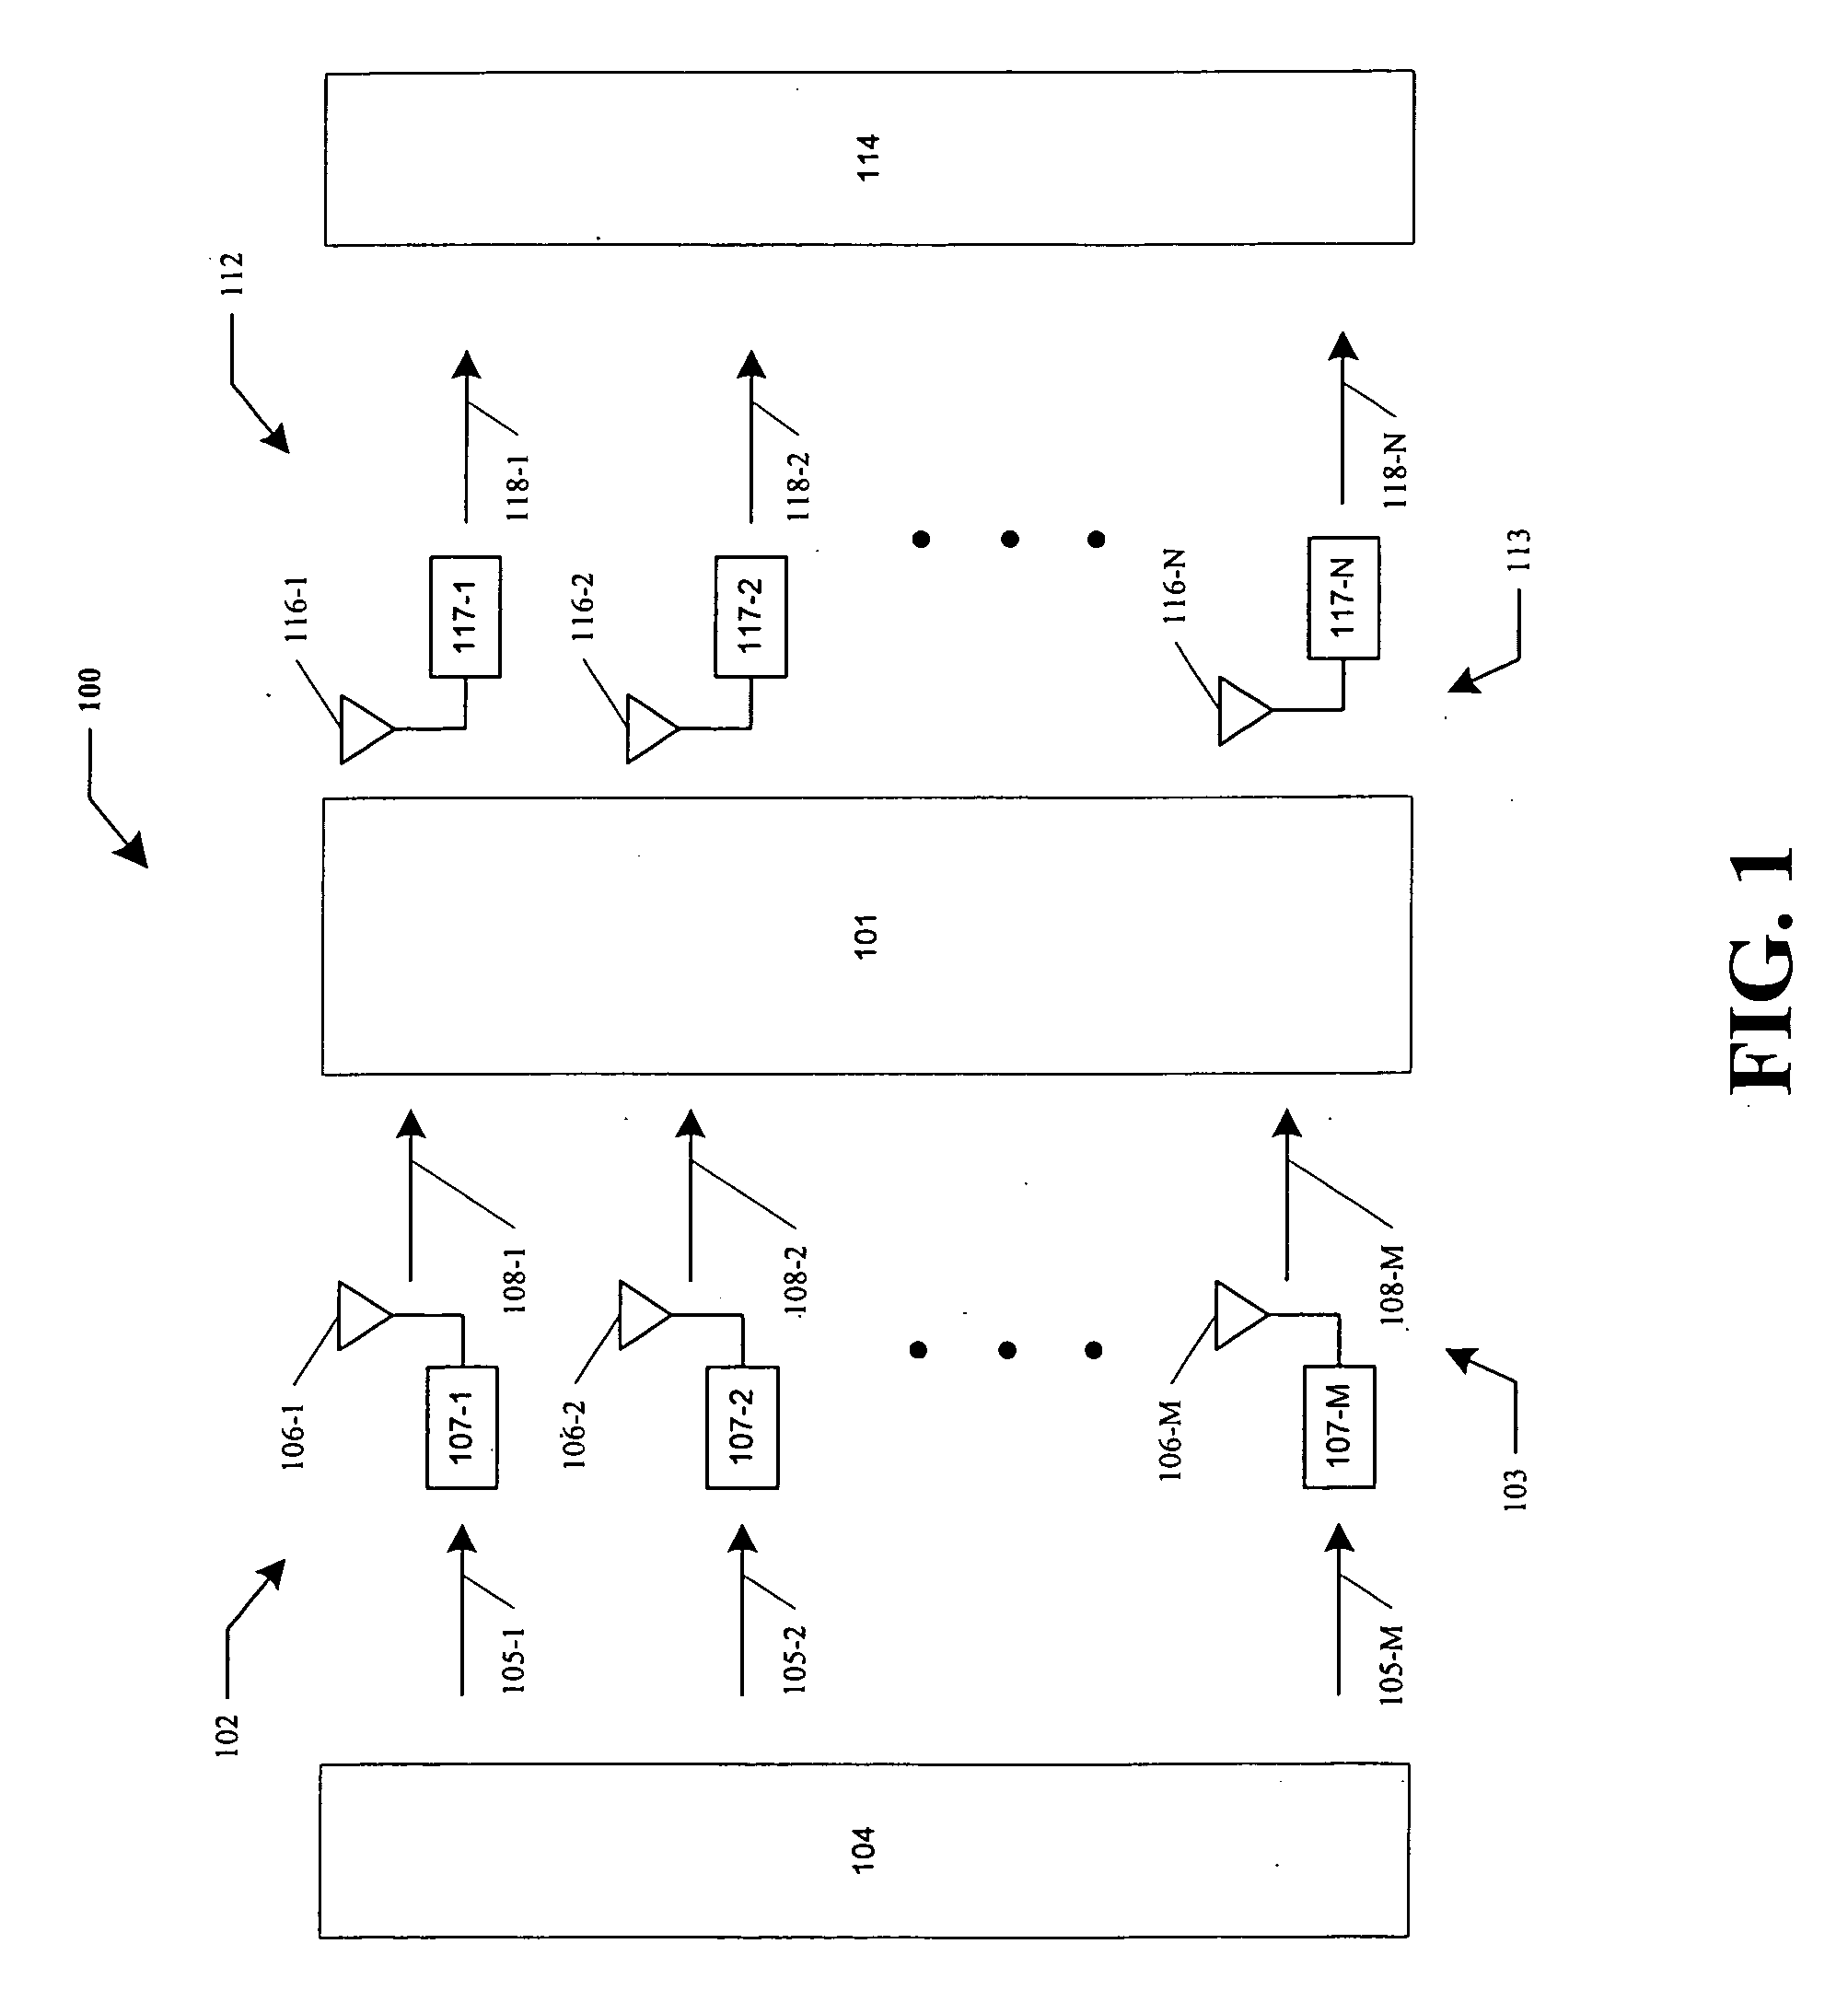 Systems and methods for resource allocation to multiple antenna arrays for maintaining a constant bit rate (CBR) channel